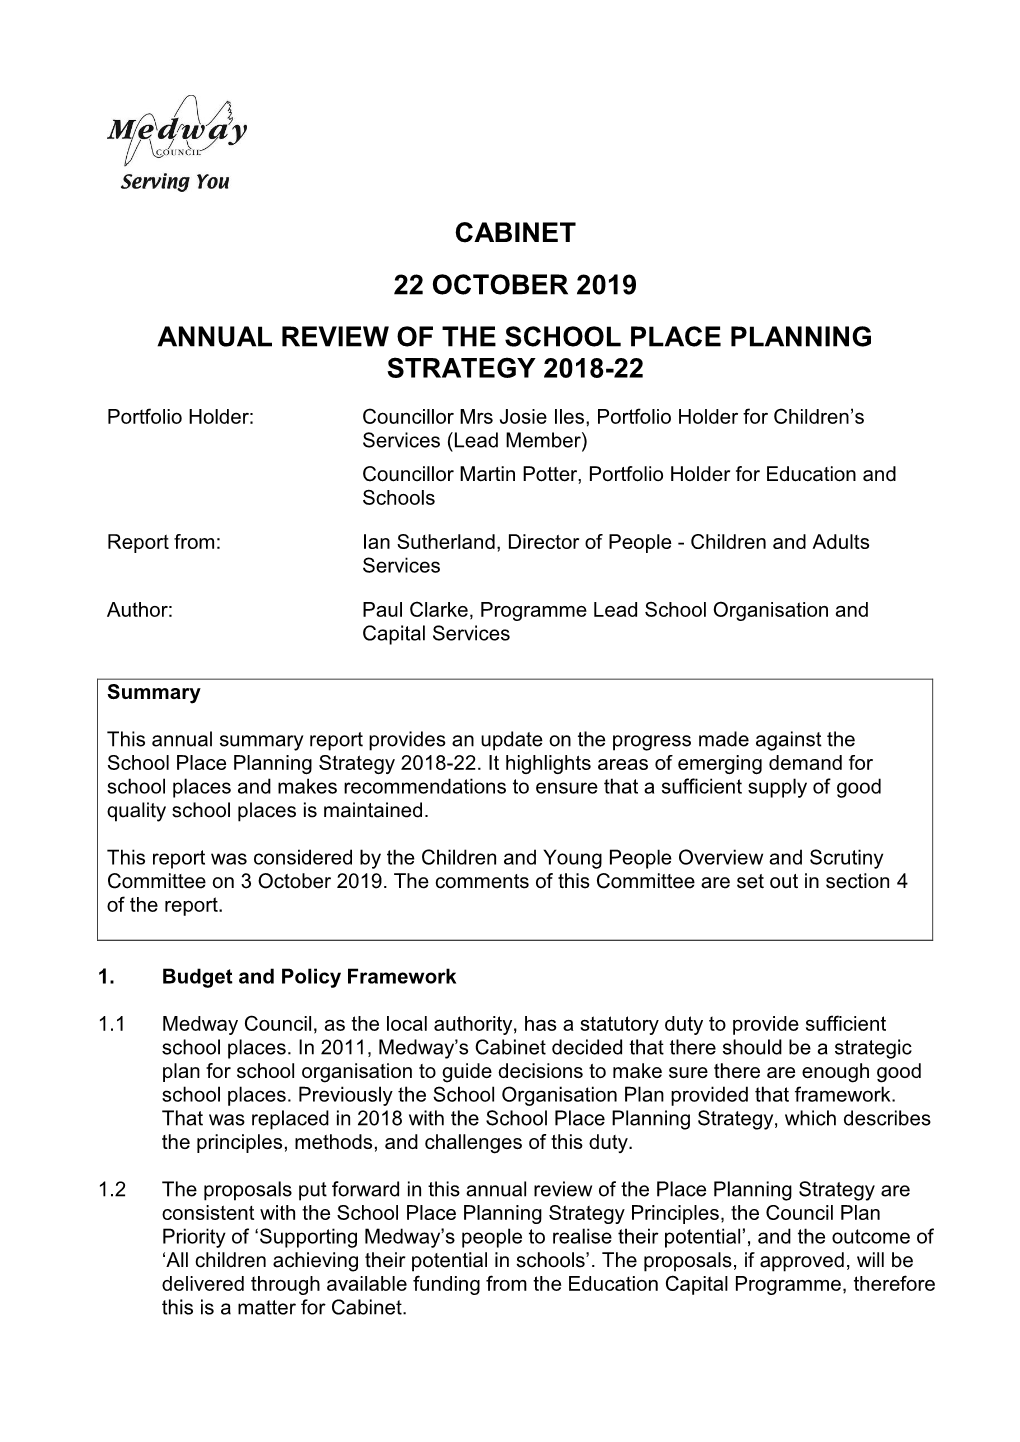 Cabinet 22 October 2019 Annual Review of the School Place Planning Strategy 2018-22